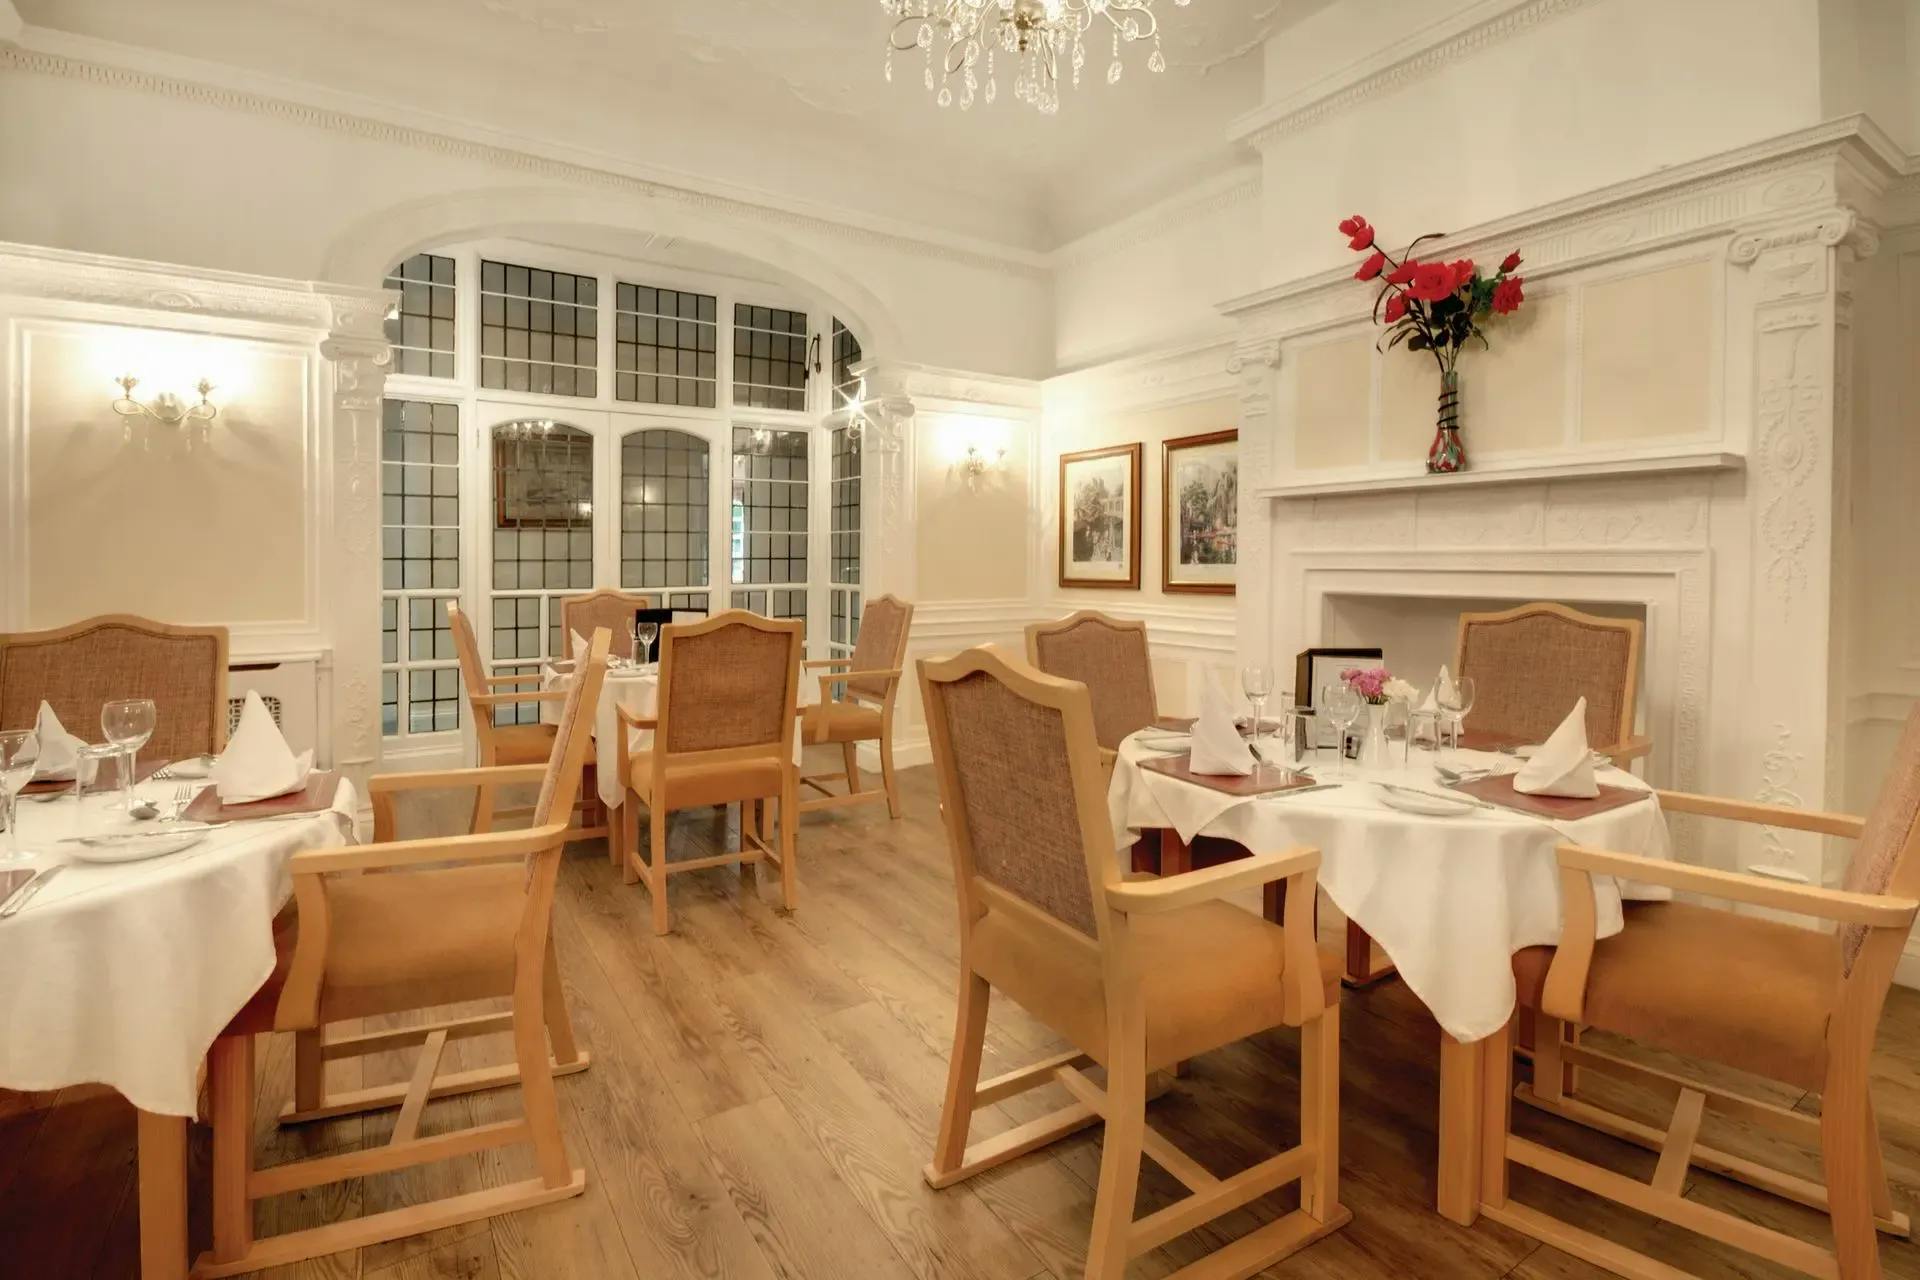 Dining Room at Garth House Care Home in Dorking, Mole Valley